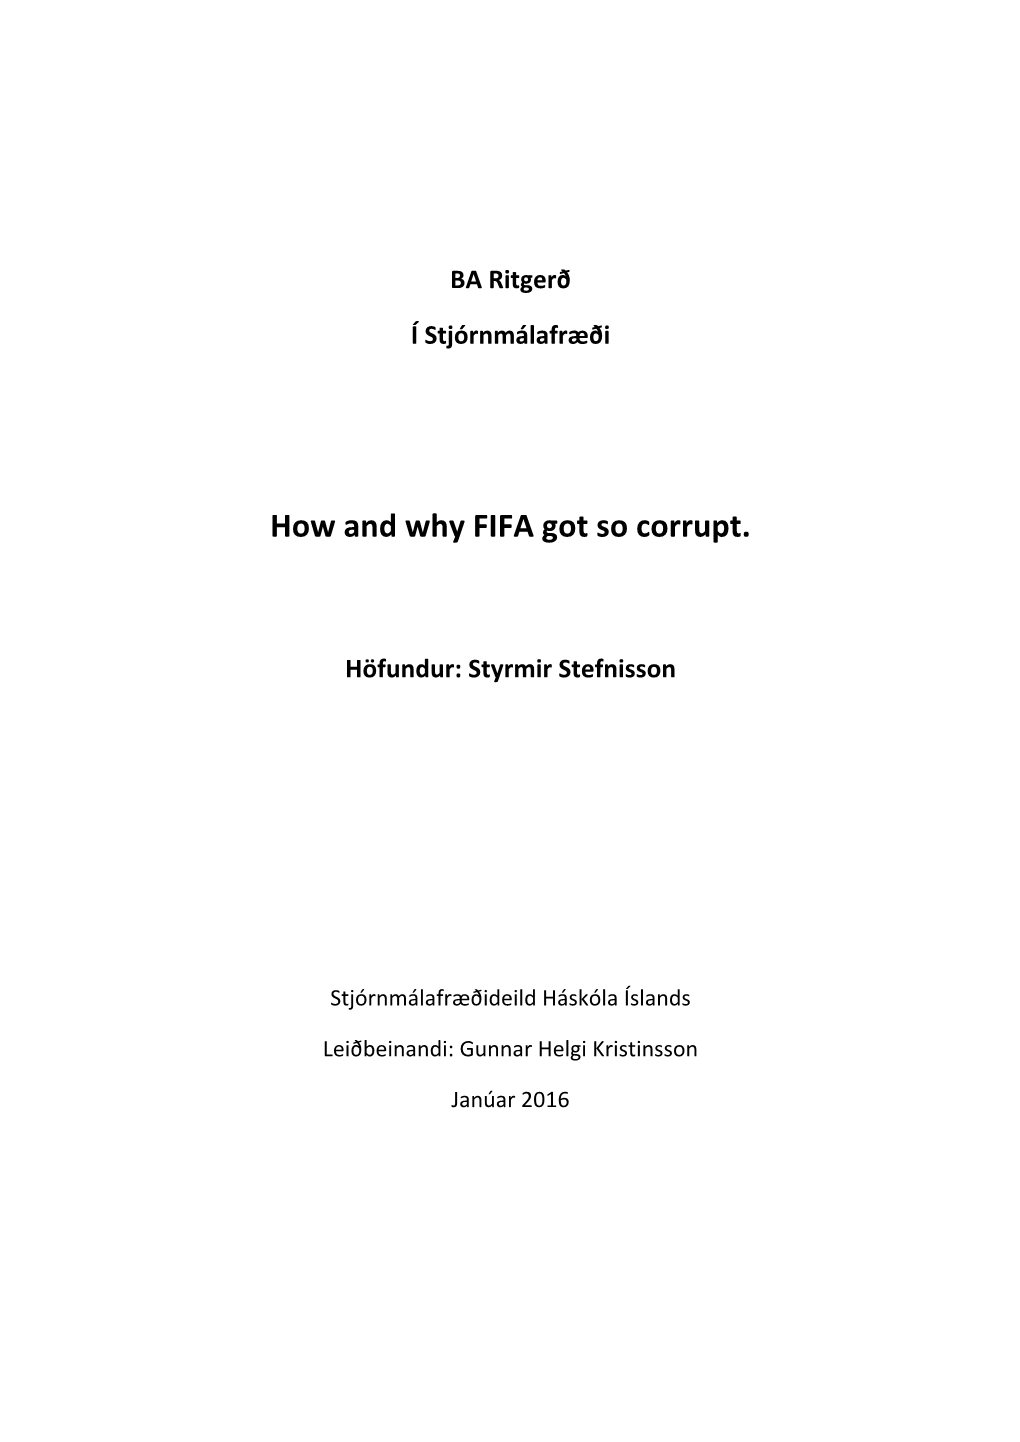 How and Why FIFA Got So Corrupt